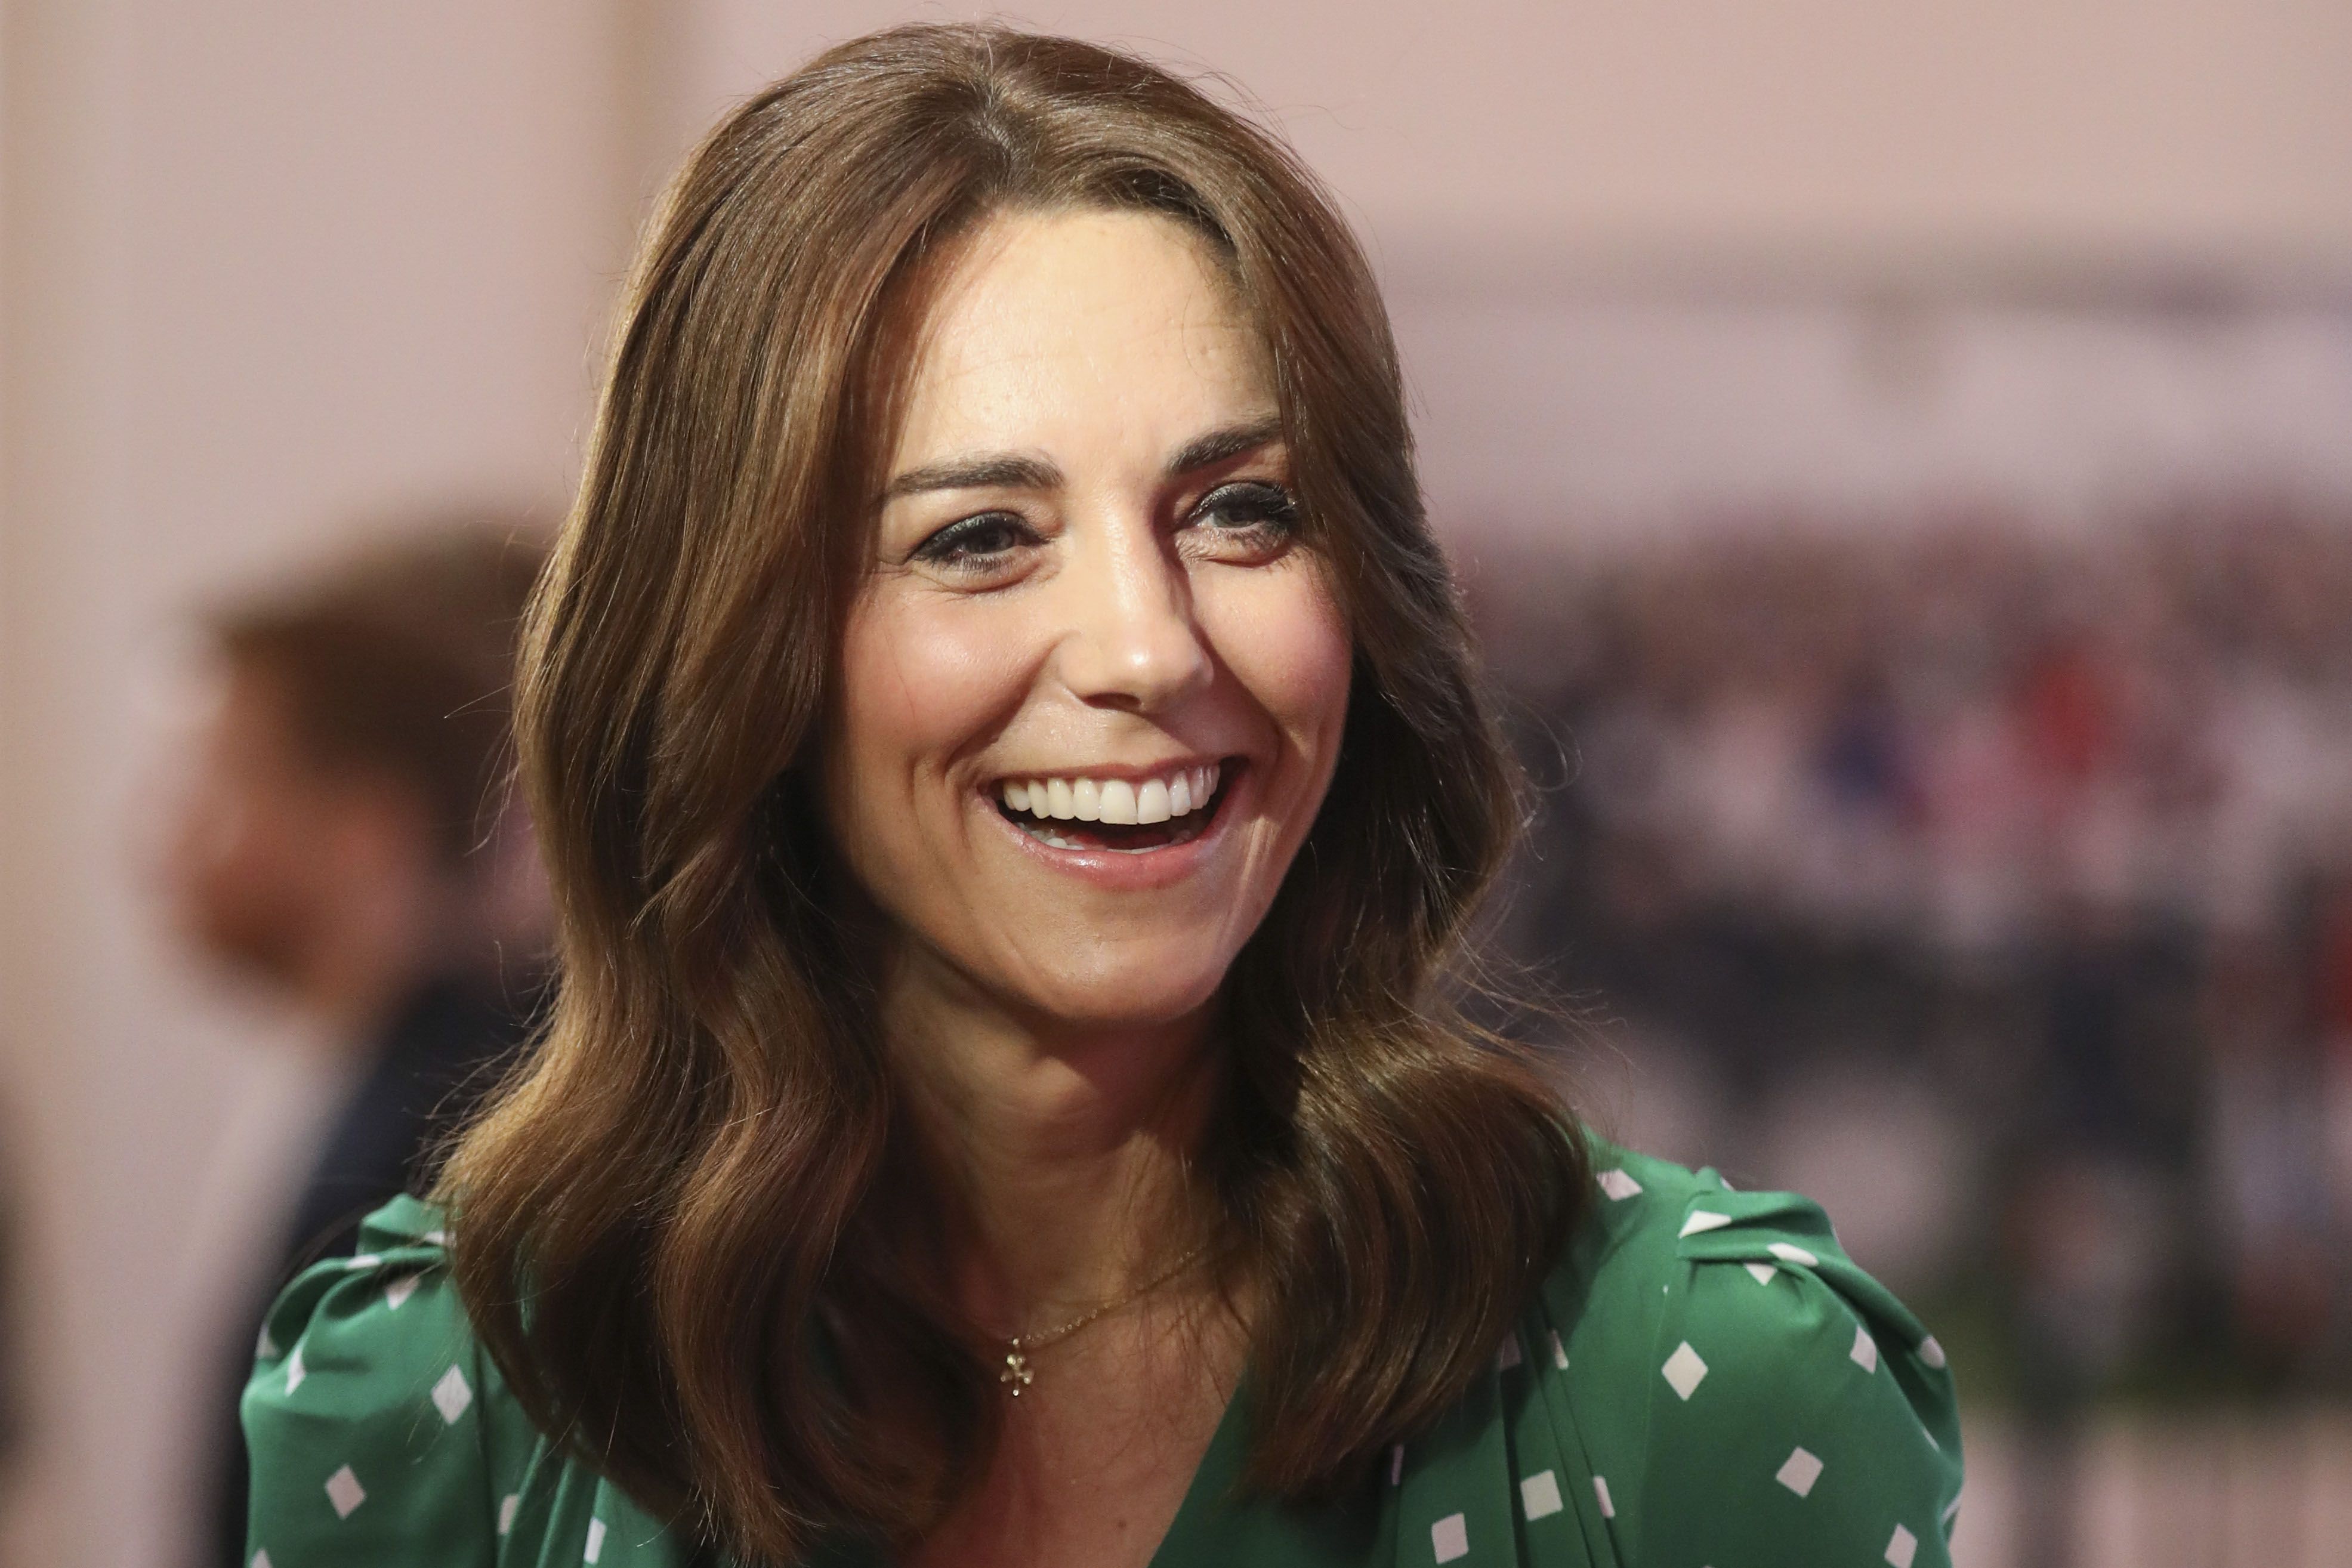 Kate Middleton Kate Middleton Latest Stories And Pictures The Sun Kate Middleton Une Maman